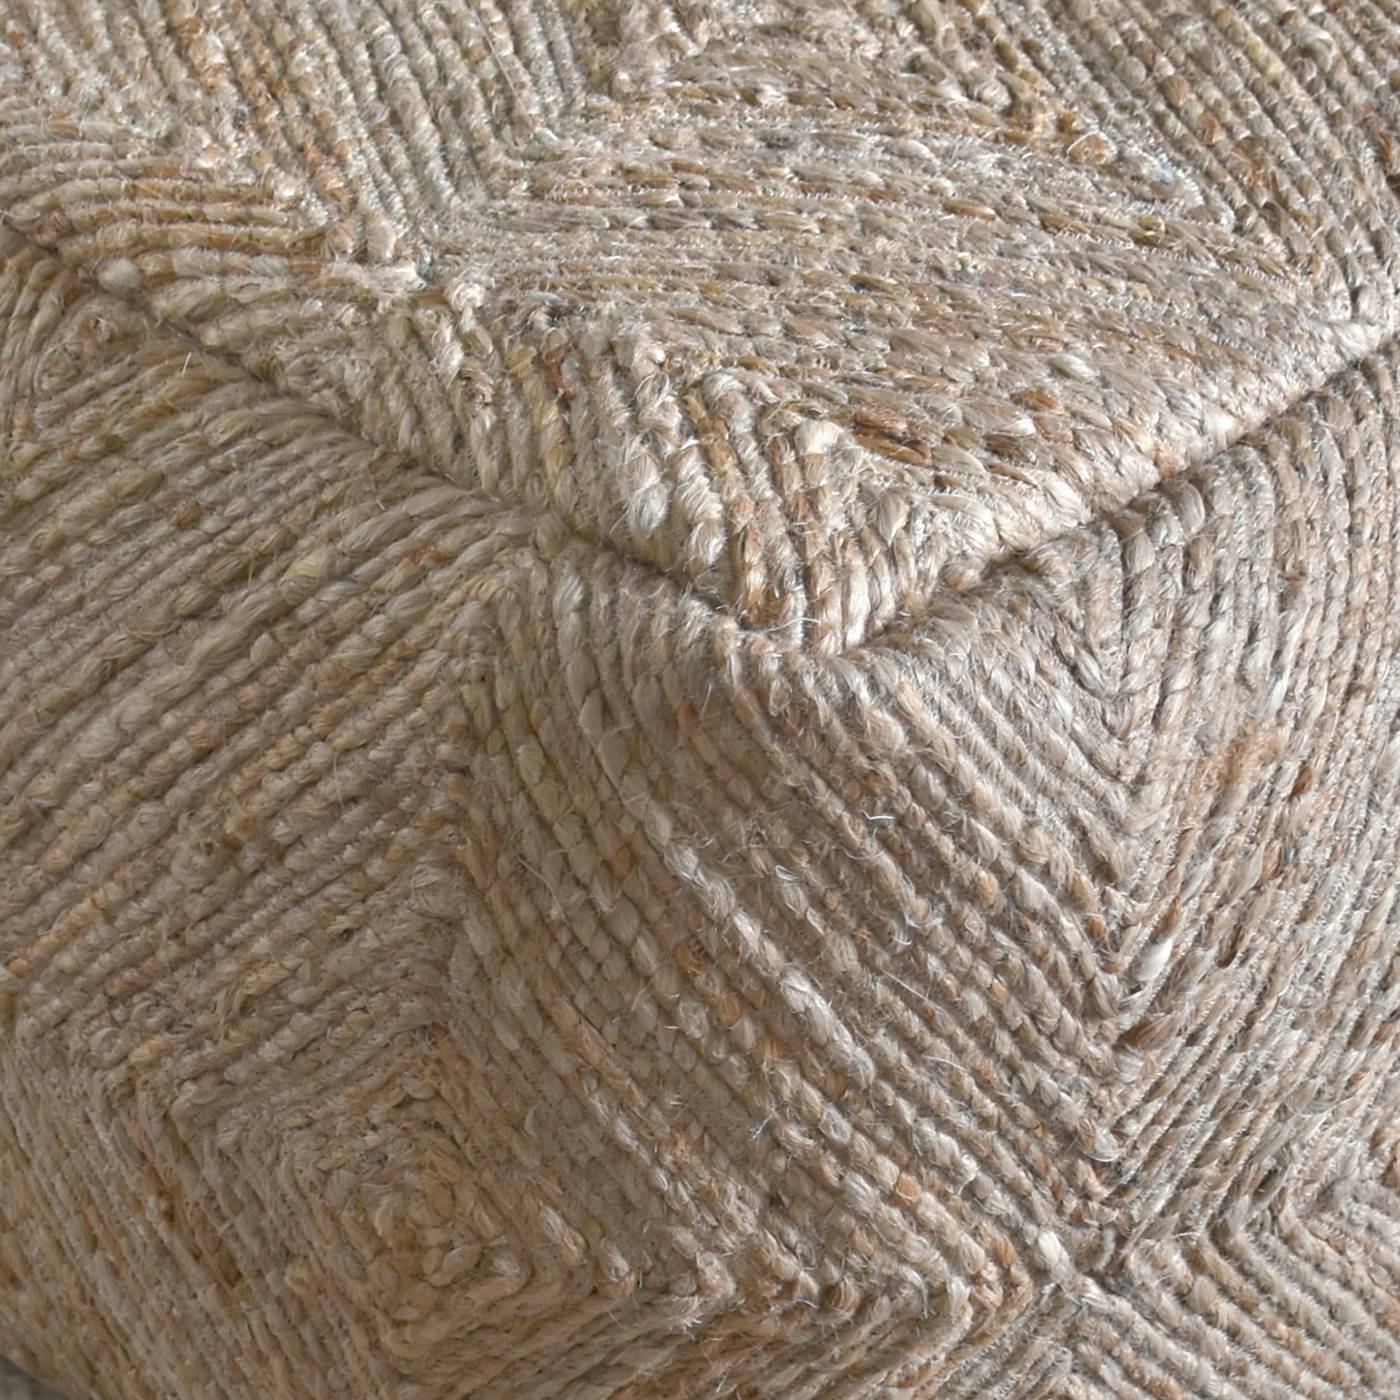 Ethnic-II Pouf, 40x40x40 cm, Natural, Jute, Hand Made, Hm Stitching, Flat Weave